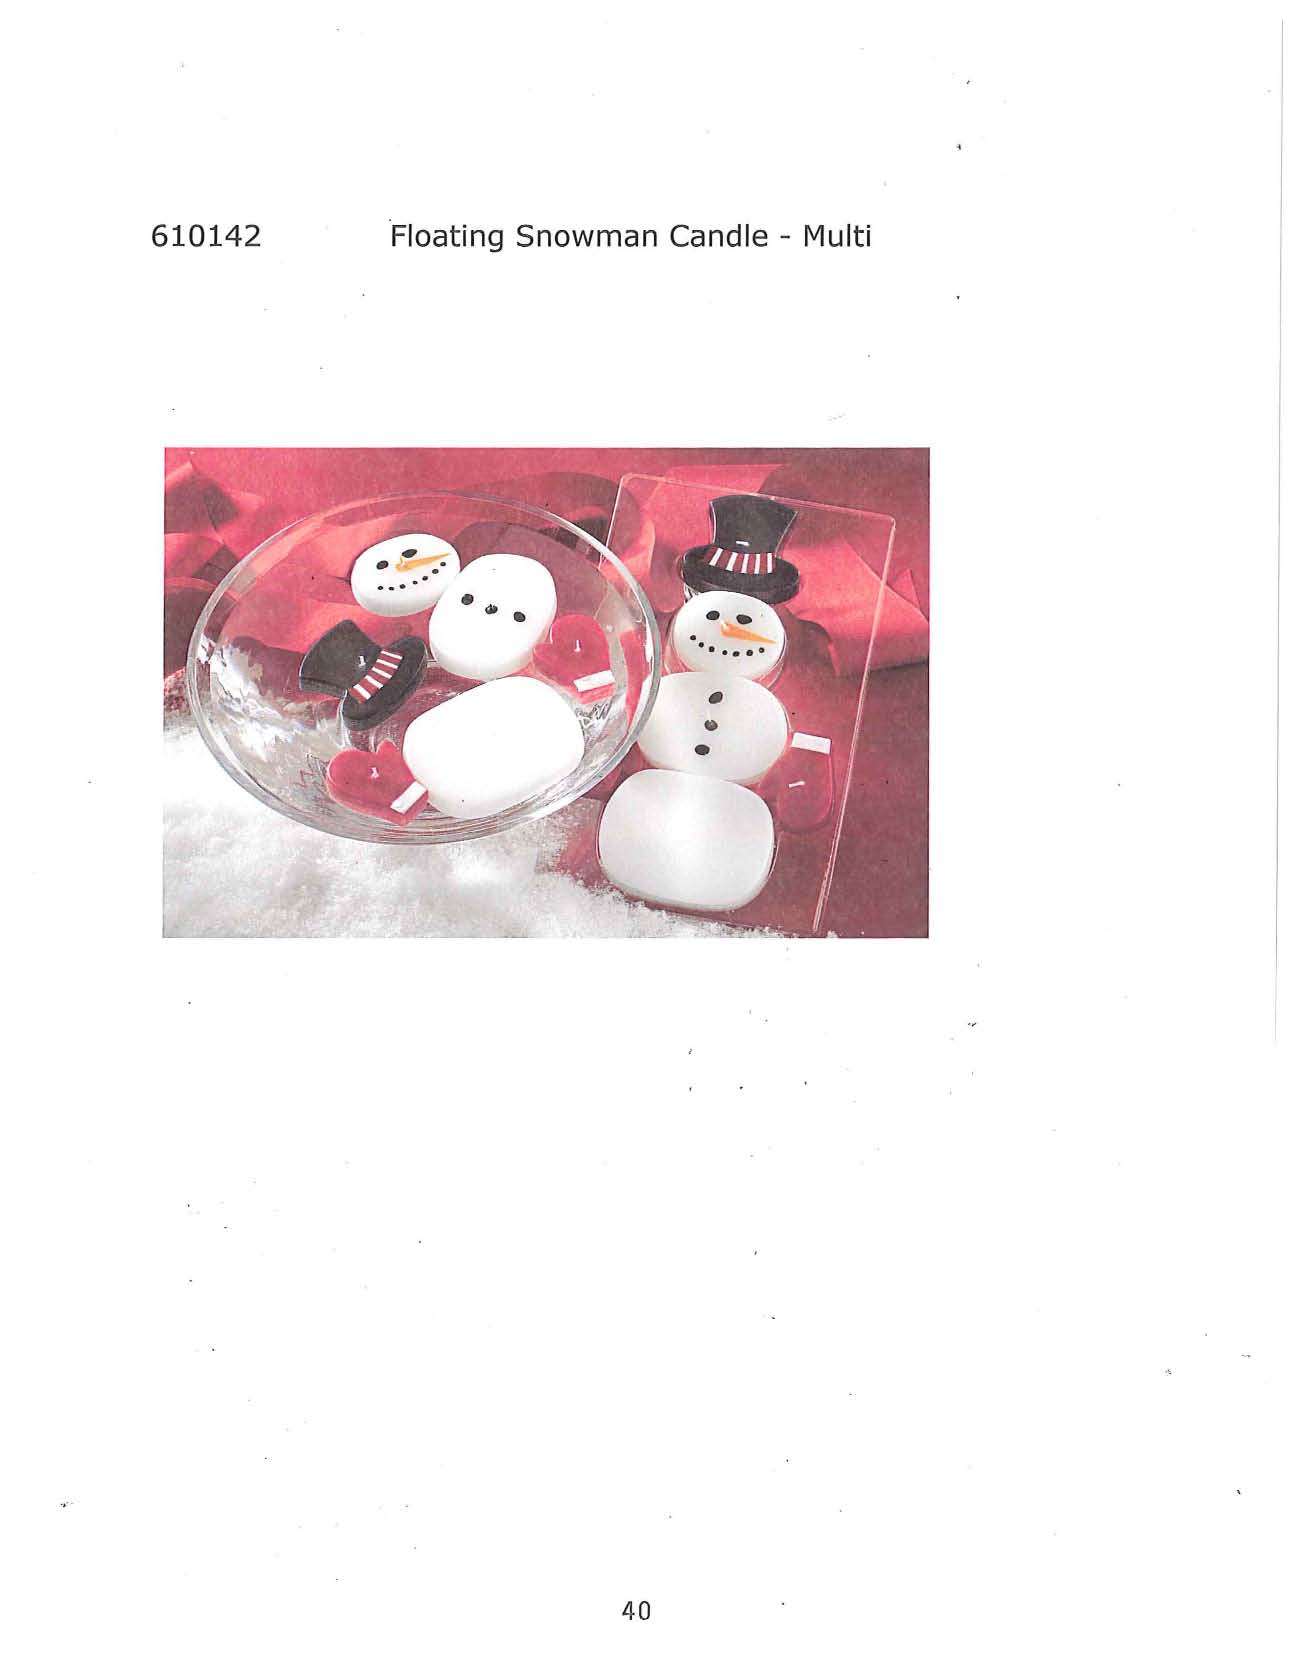 Floating Snowman Candle - Multi